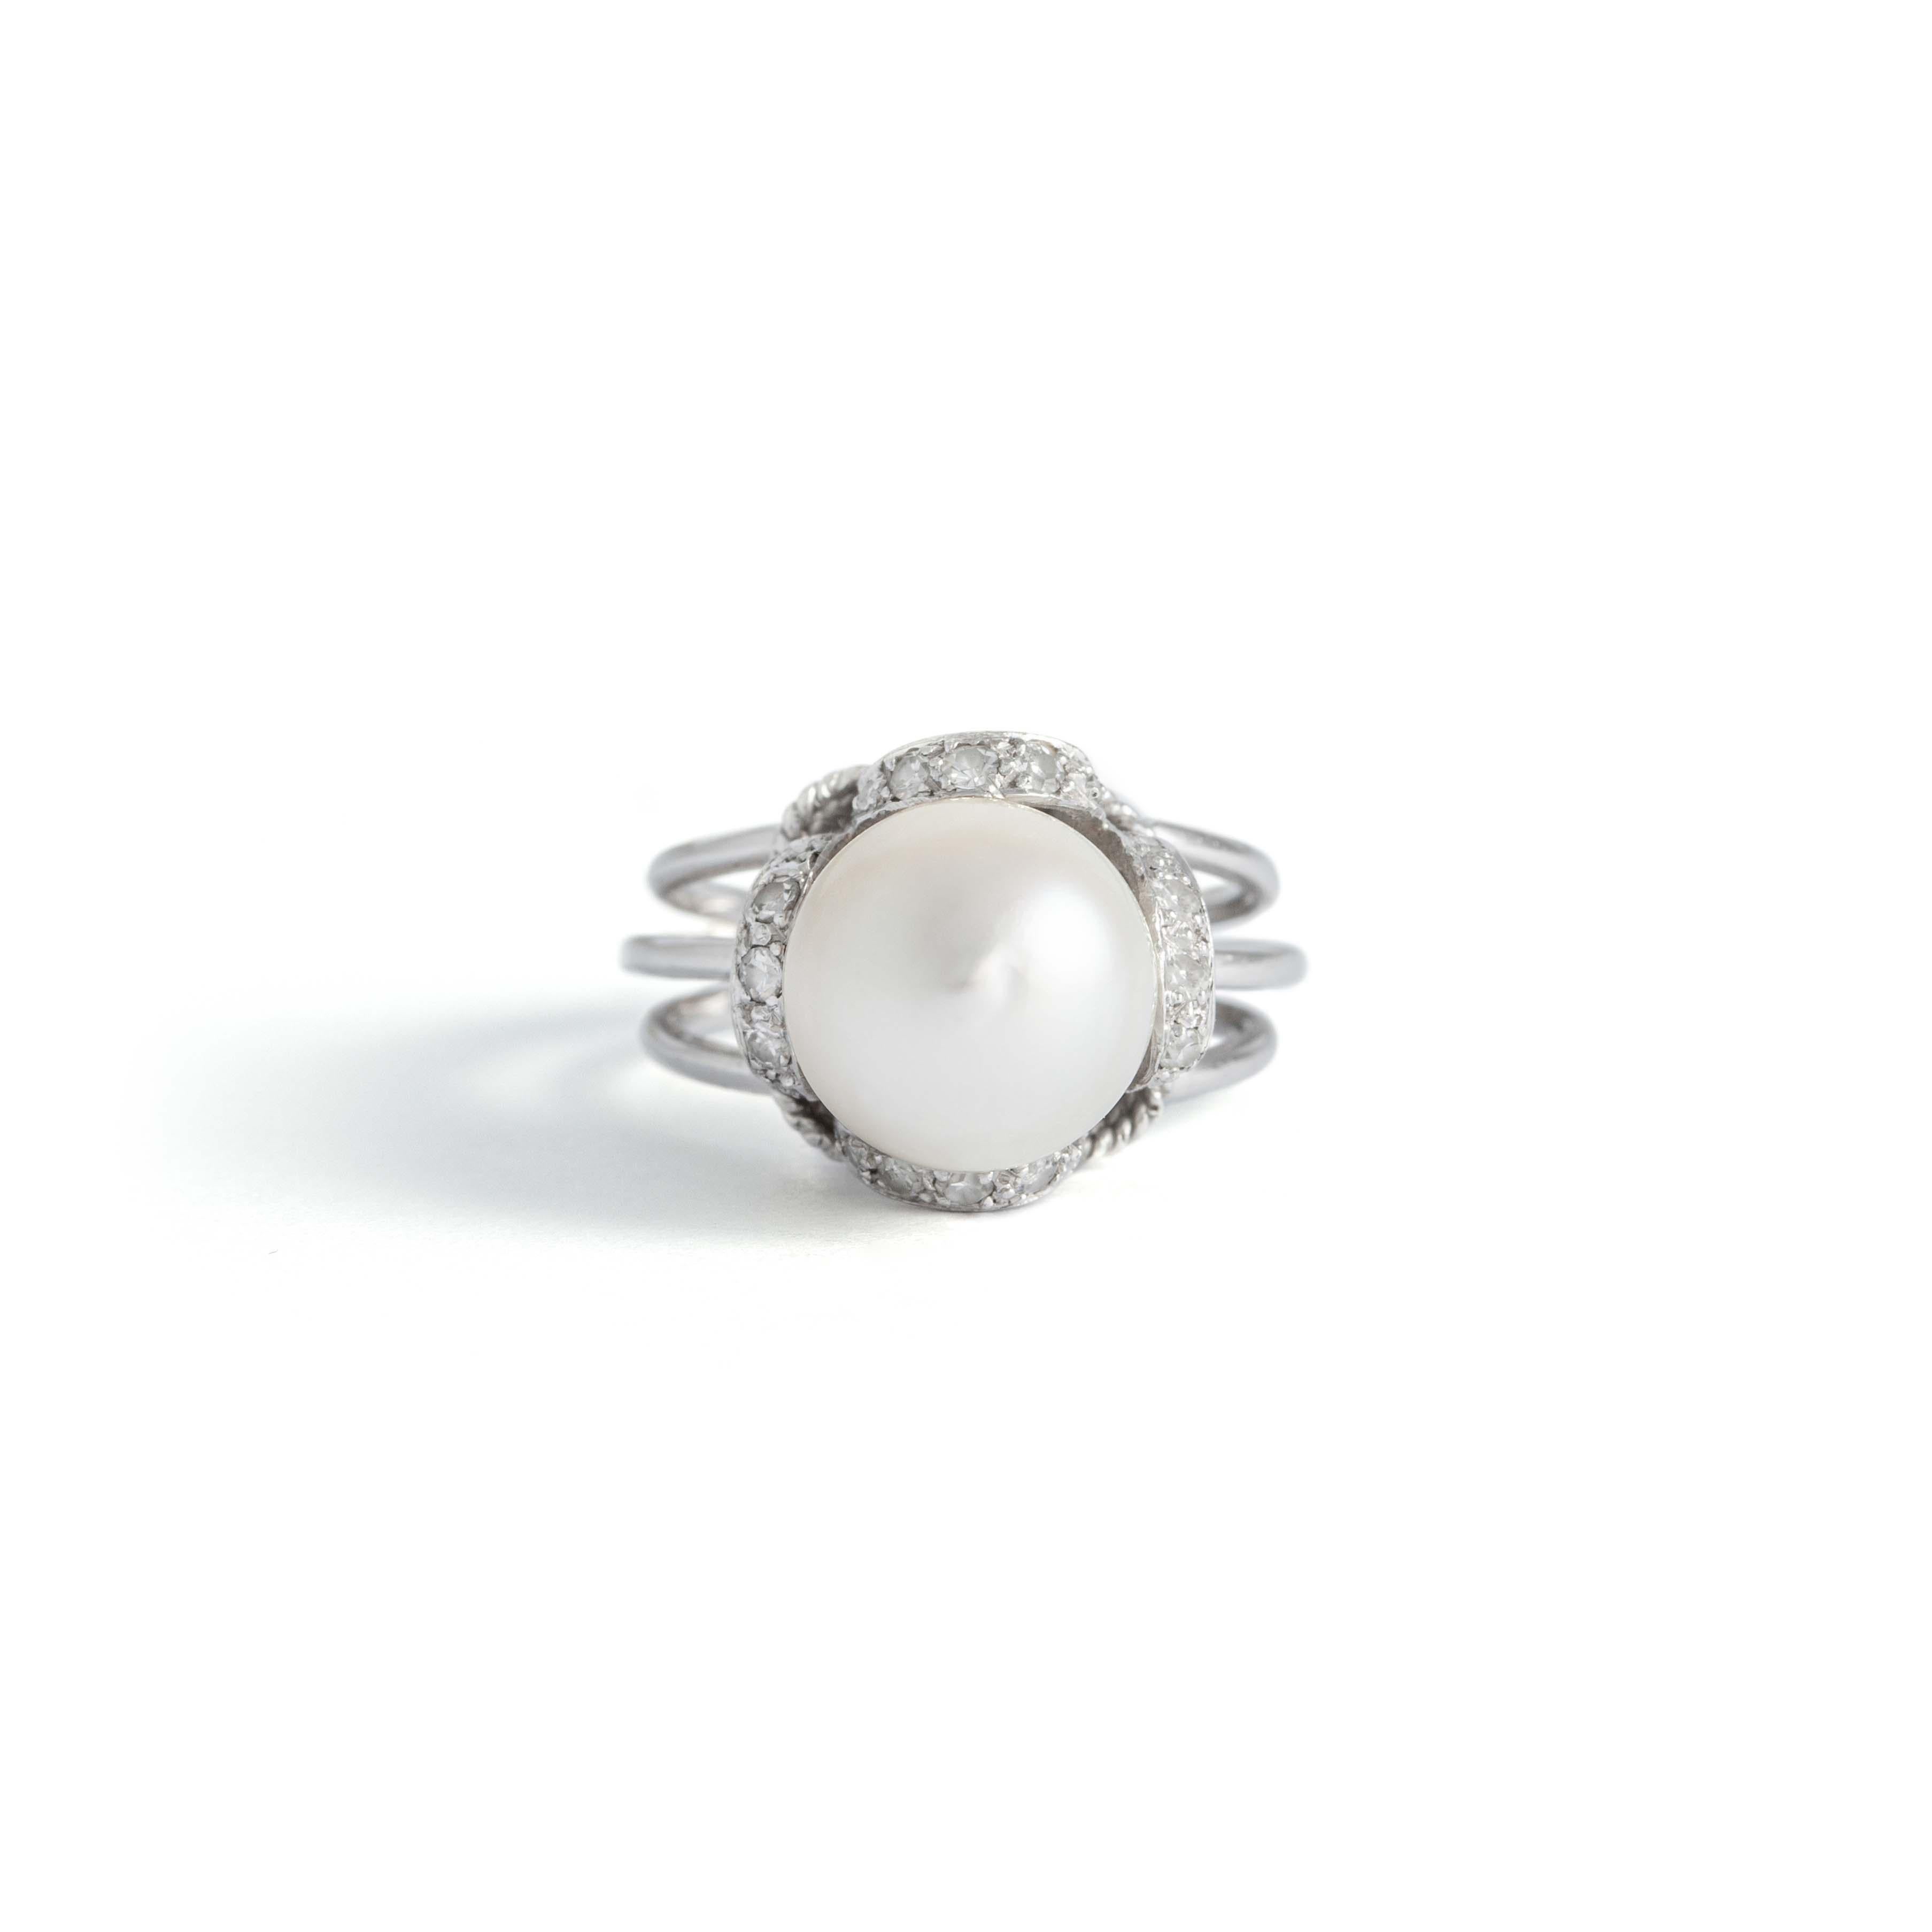 18K white gold ring centered by a cultured pearl surrounded by round-cut white stones.
Gross weight: 8.01 grams.